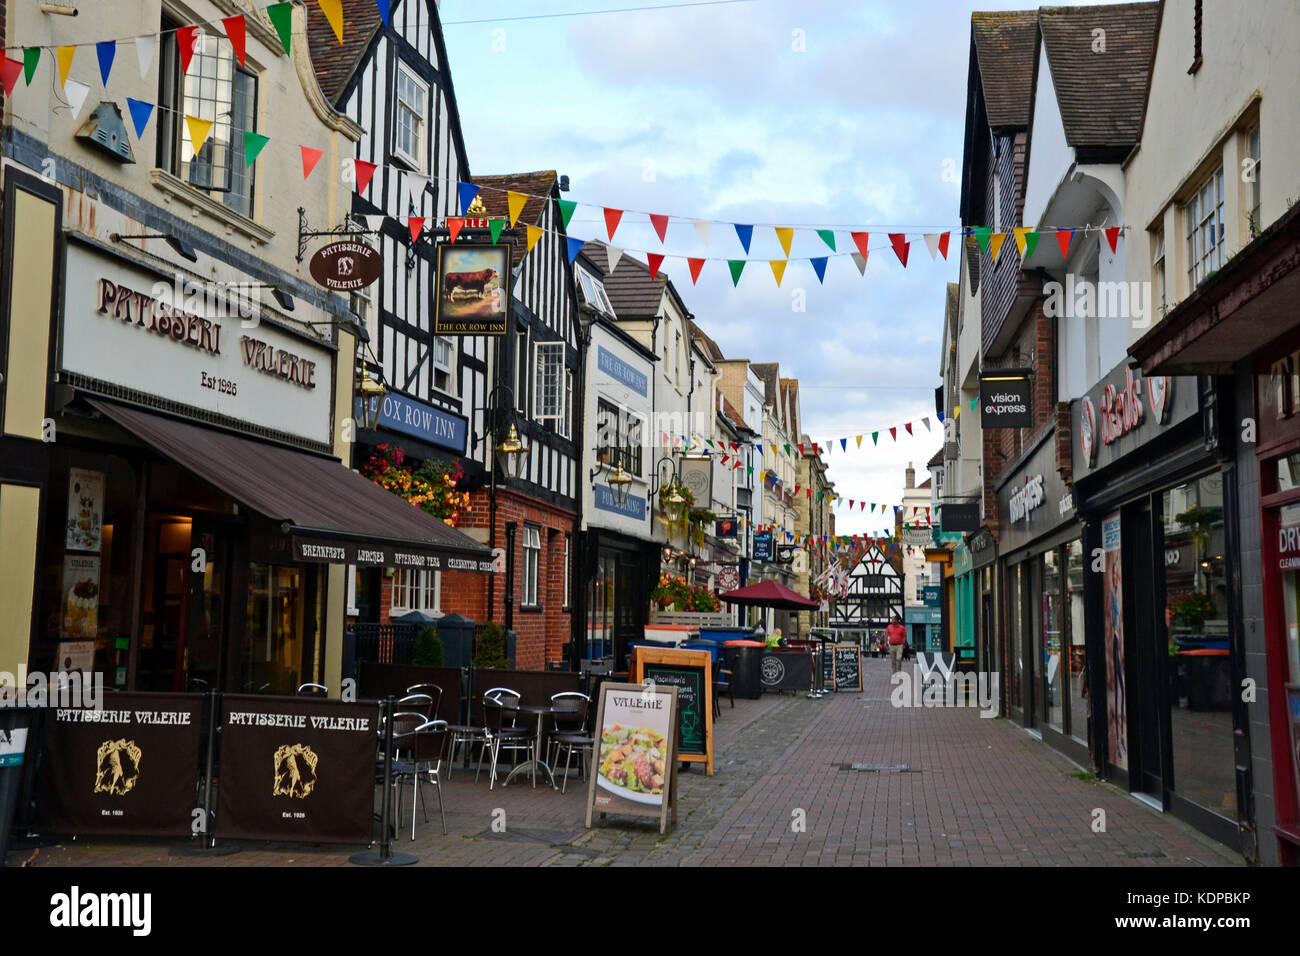 View of Salisbury city centre, Wiltshire, UK. Shopping streets Stock Photo